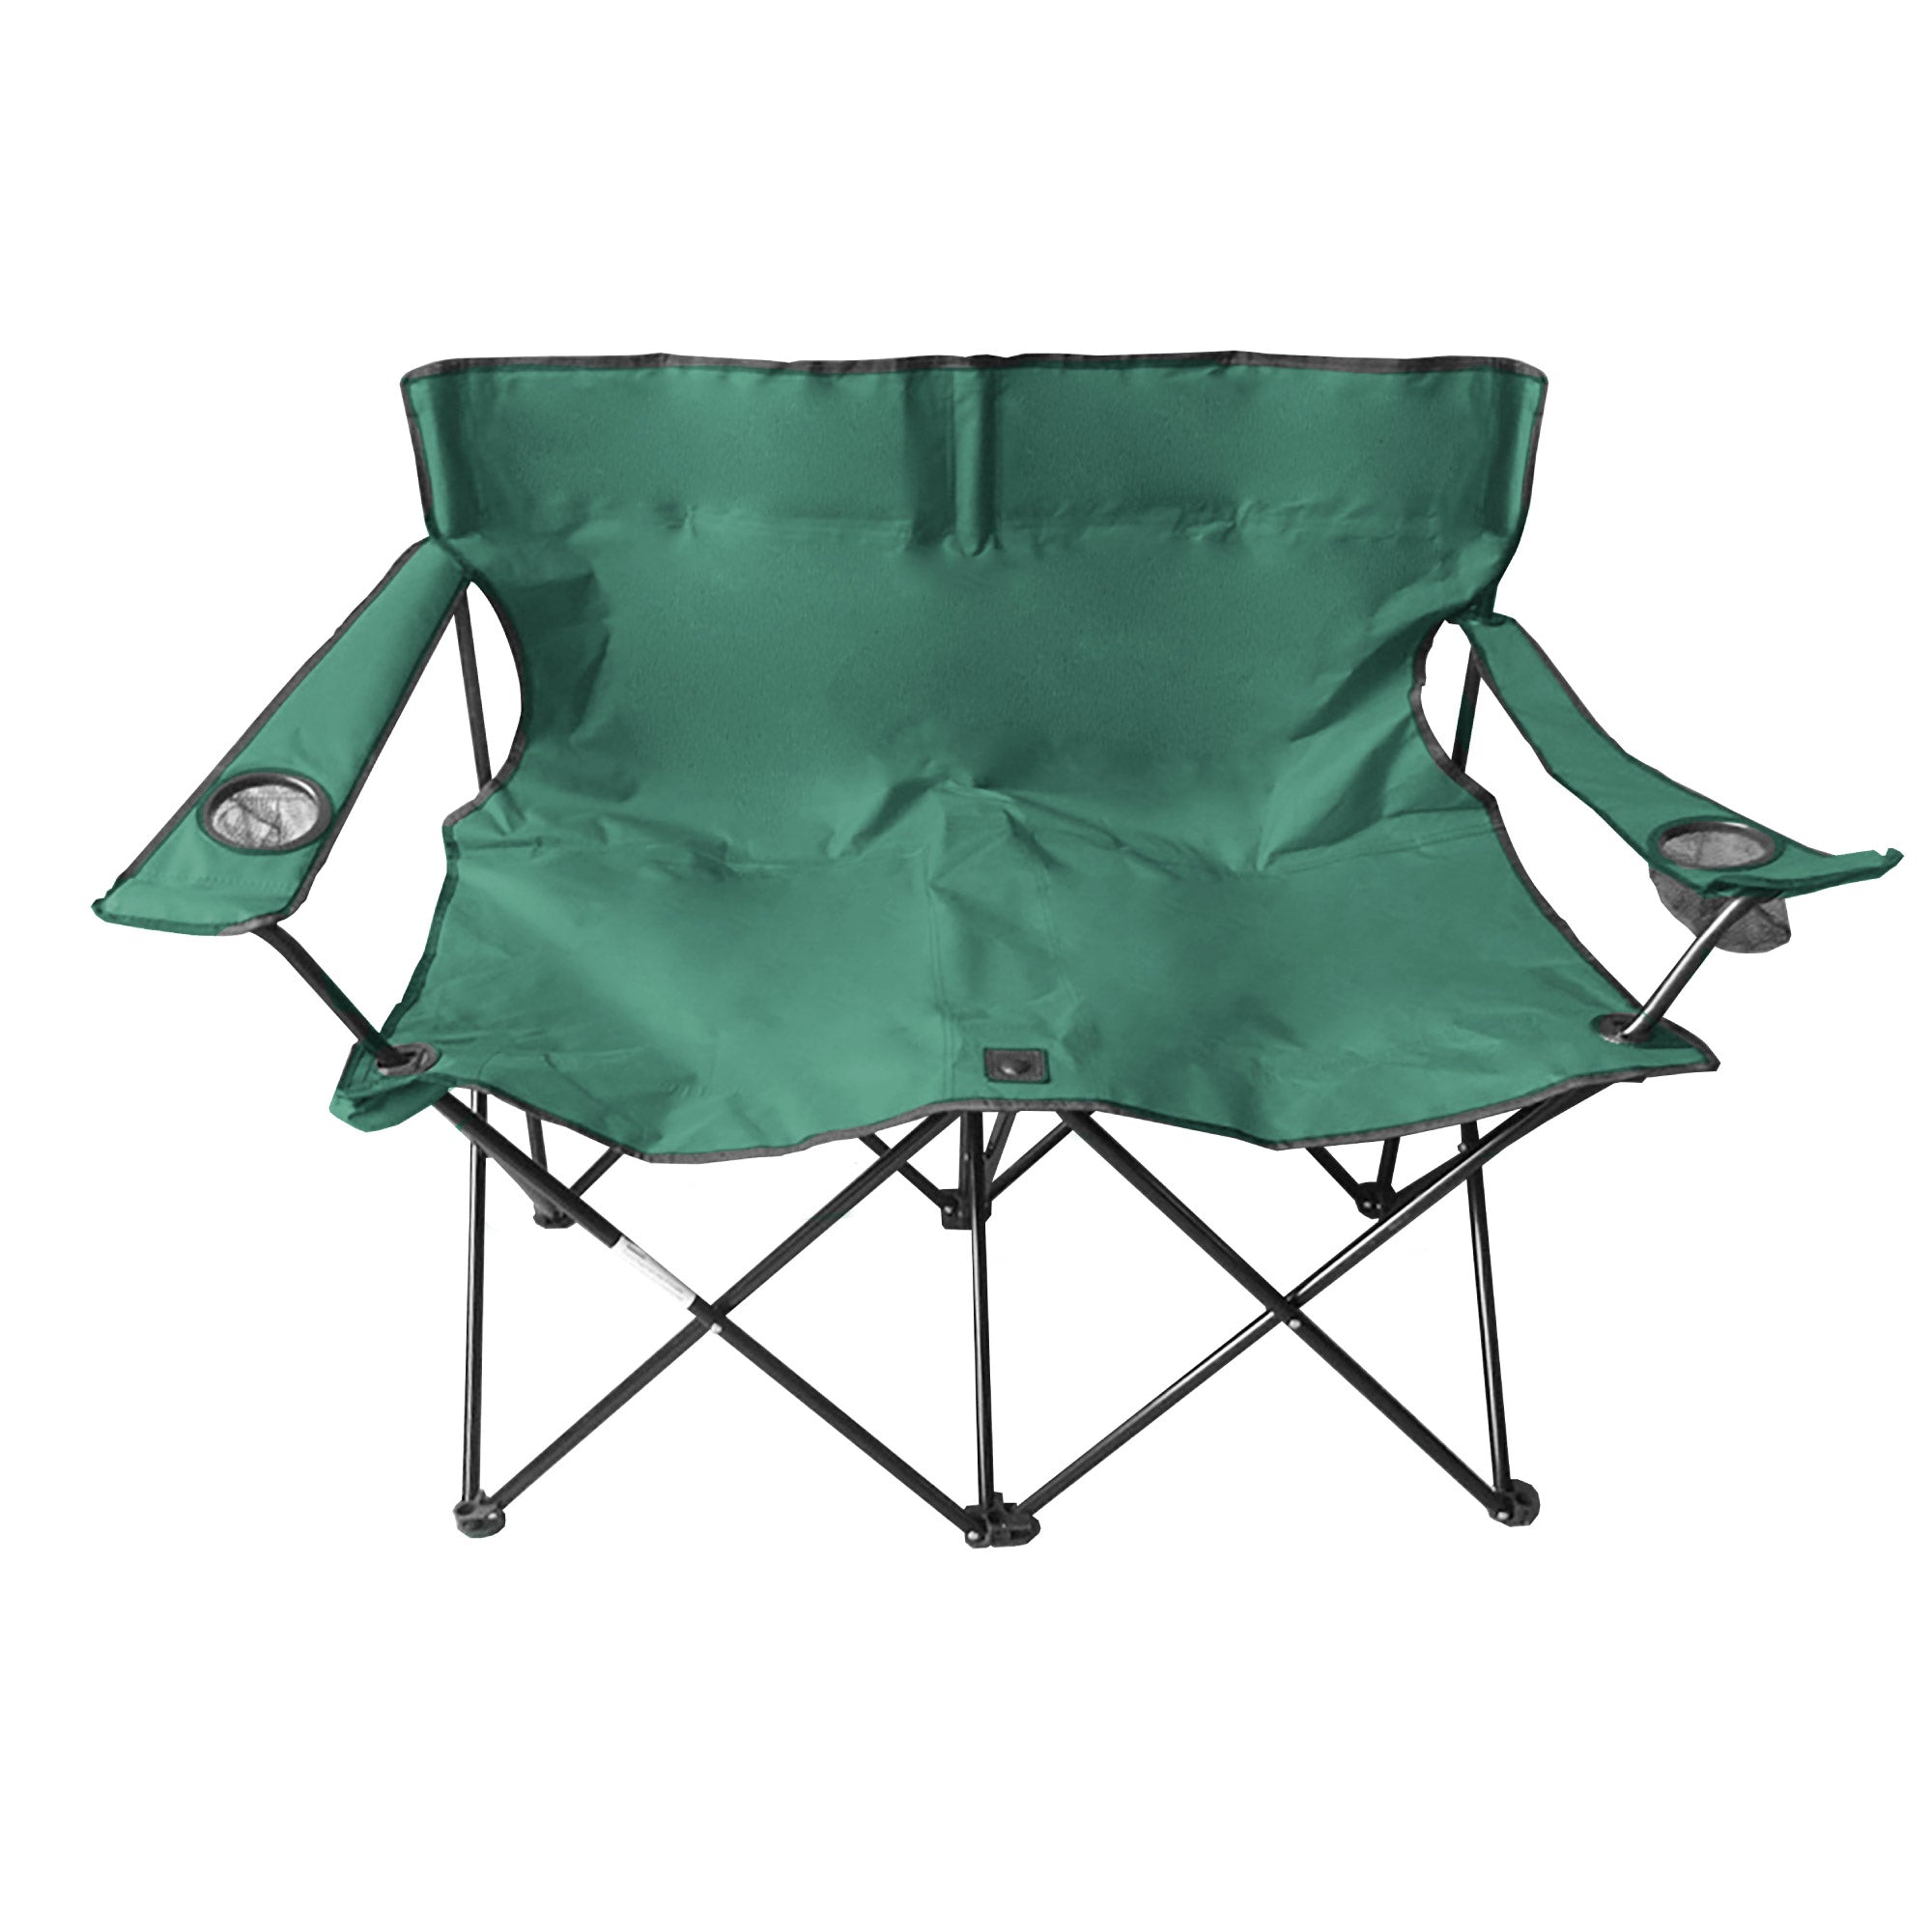 Steel Double Seater Camping Chair - Green - TJ Hughes